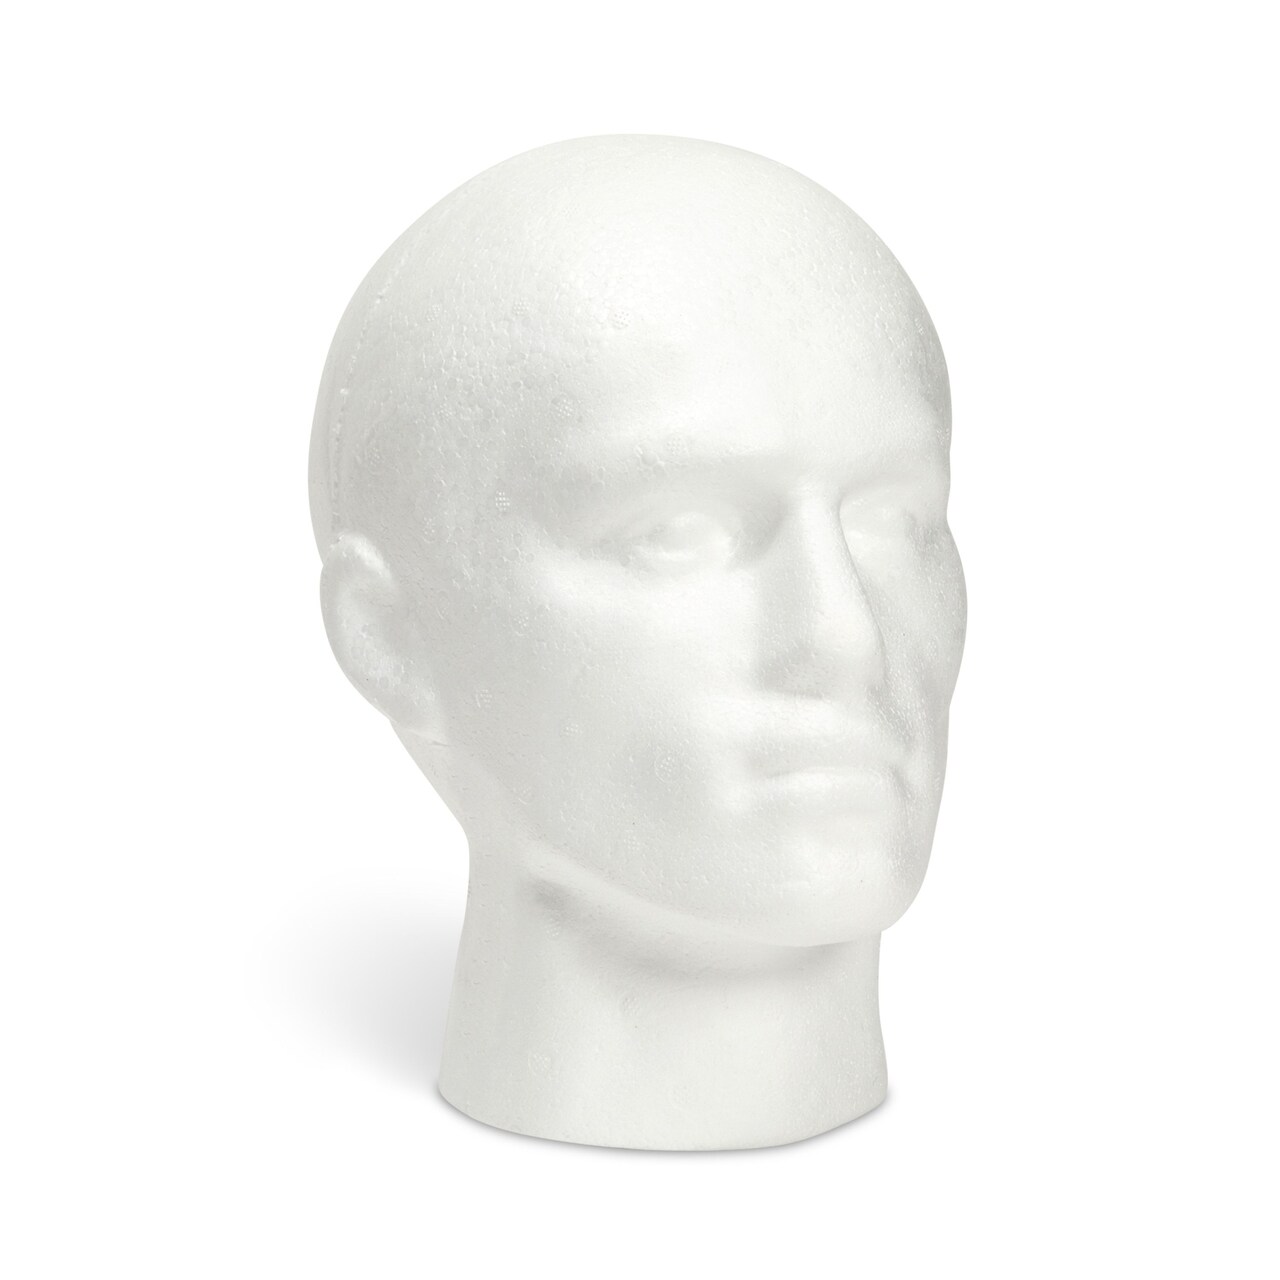 Male Foam Head Form, Mannequin Display for Masks, Hats, Wigs, Halloween  Decoration (White, 9x11 in)